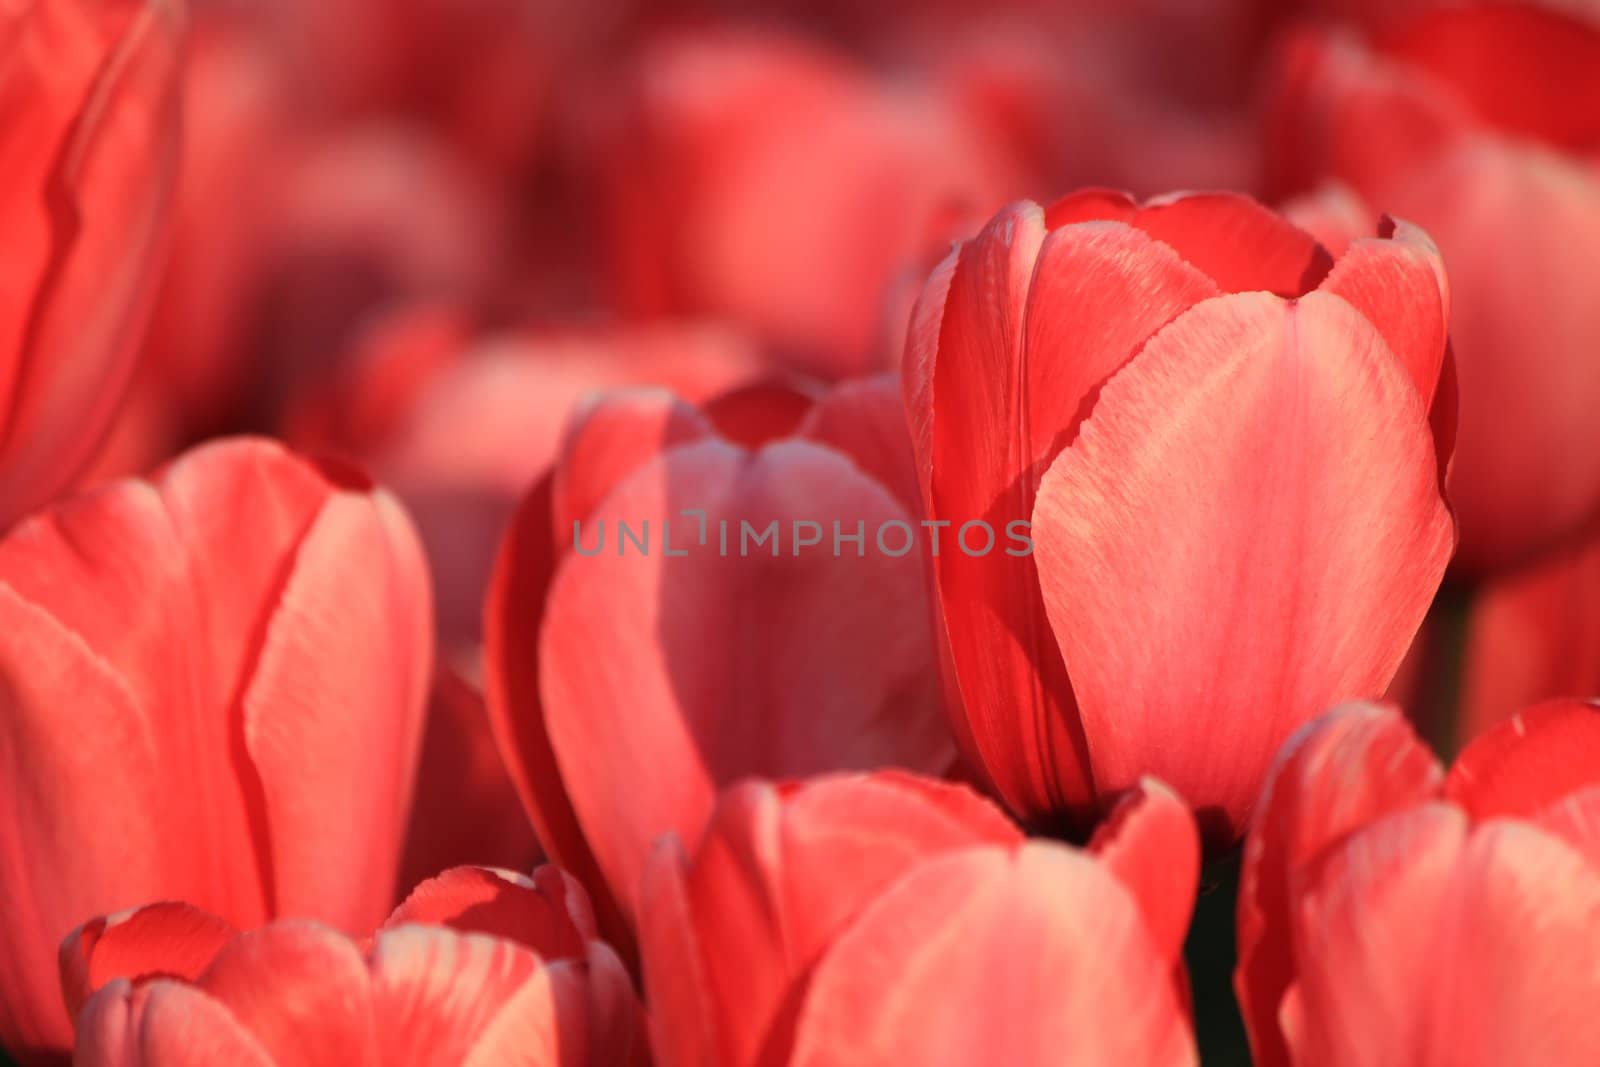 Close up of red tulips petals in a bunch